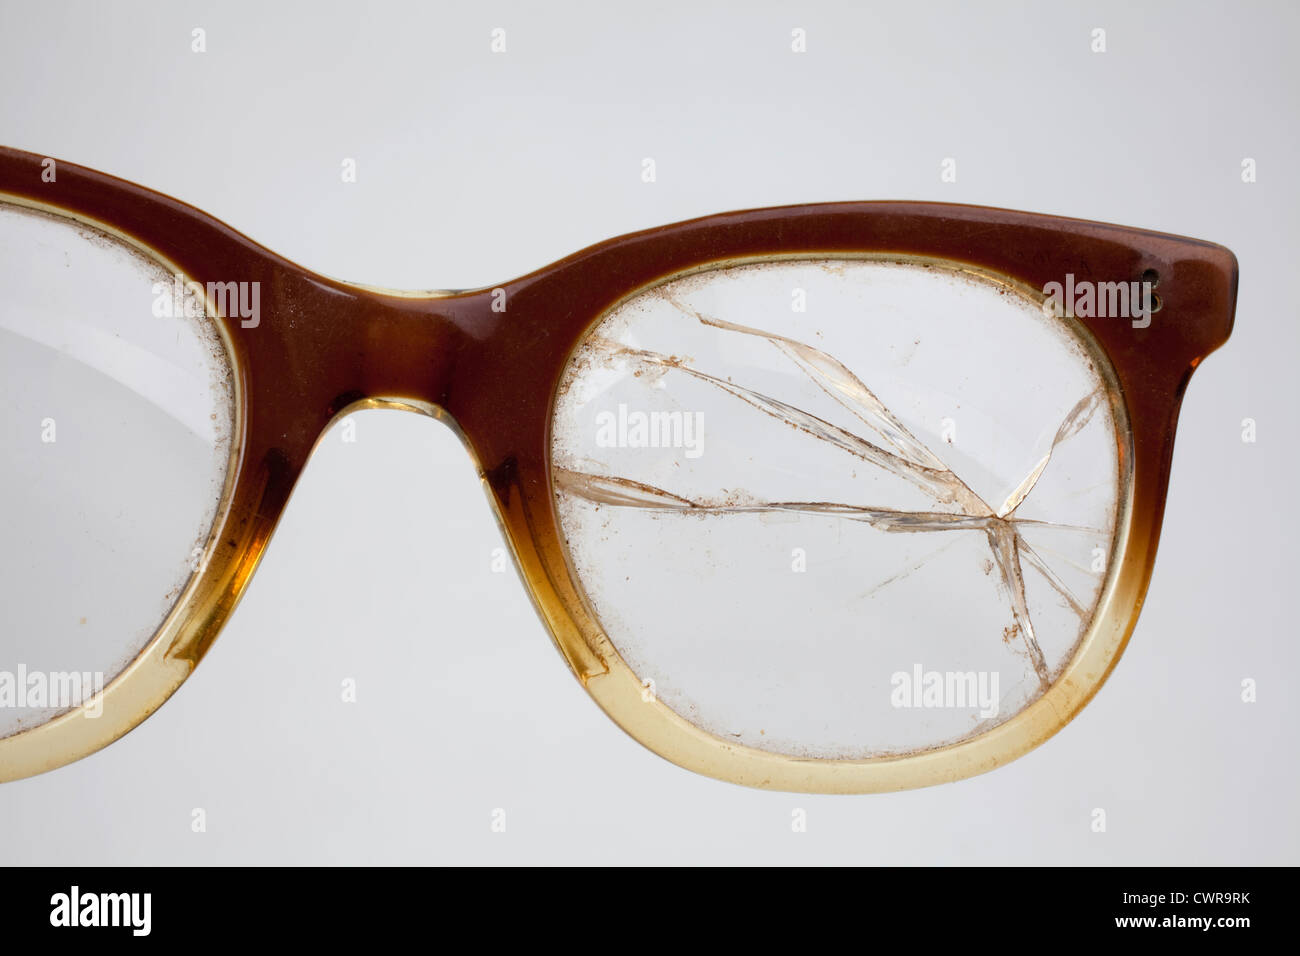 An old horn-rimmed glasses with a cracked lens Stock Photo